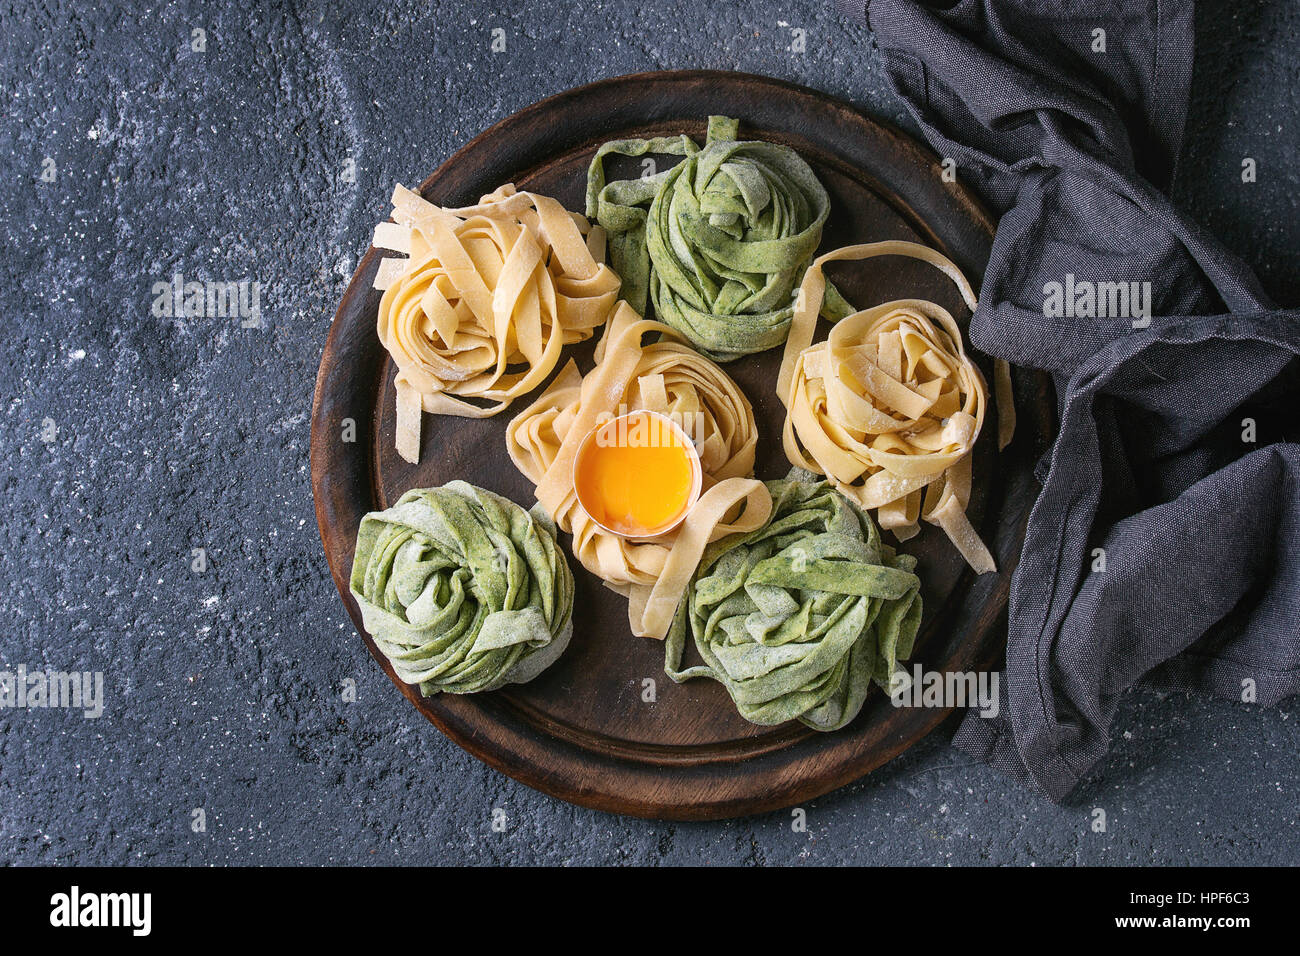 Variety of colored fresh raw uncooked homemade pasta tagliatelle green spinach and traditional yellow with egg yolk on wooden cutting board over dark Stock Photo